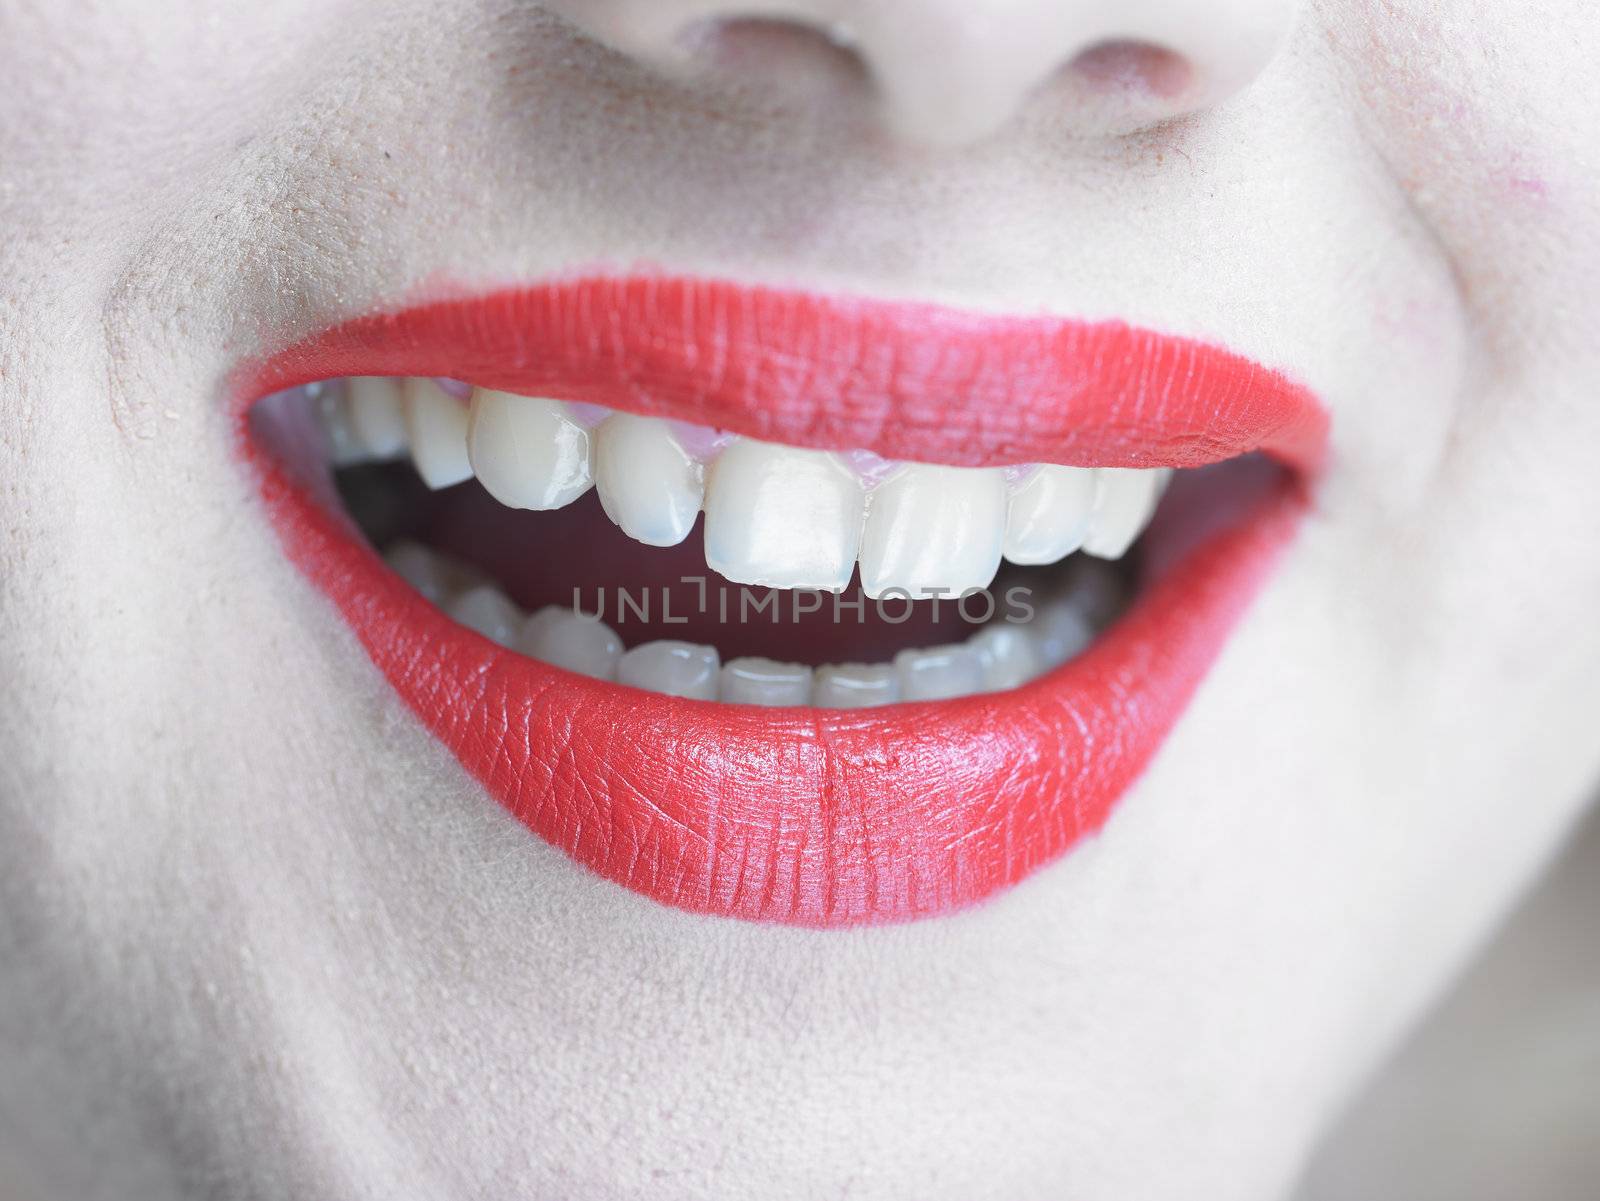 Beautiful Healty Smiling Lips with glamorous makeup, Smile by adamr